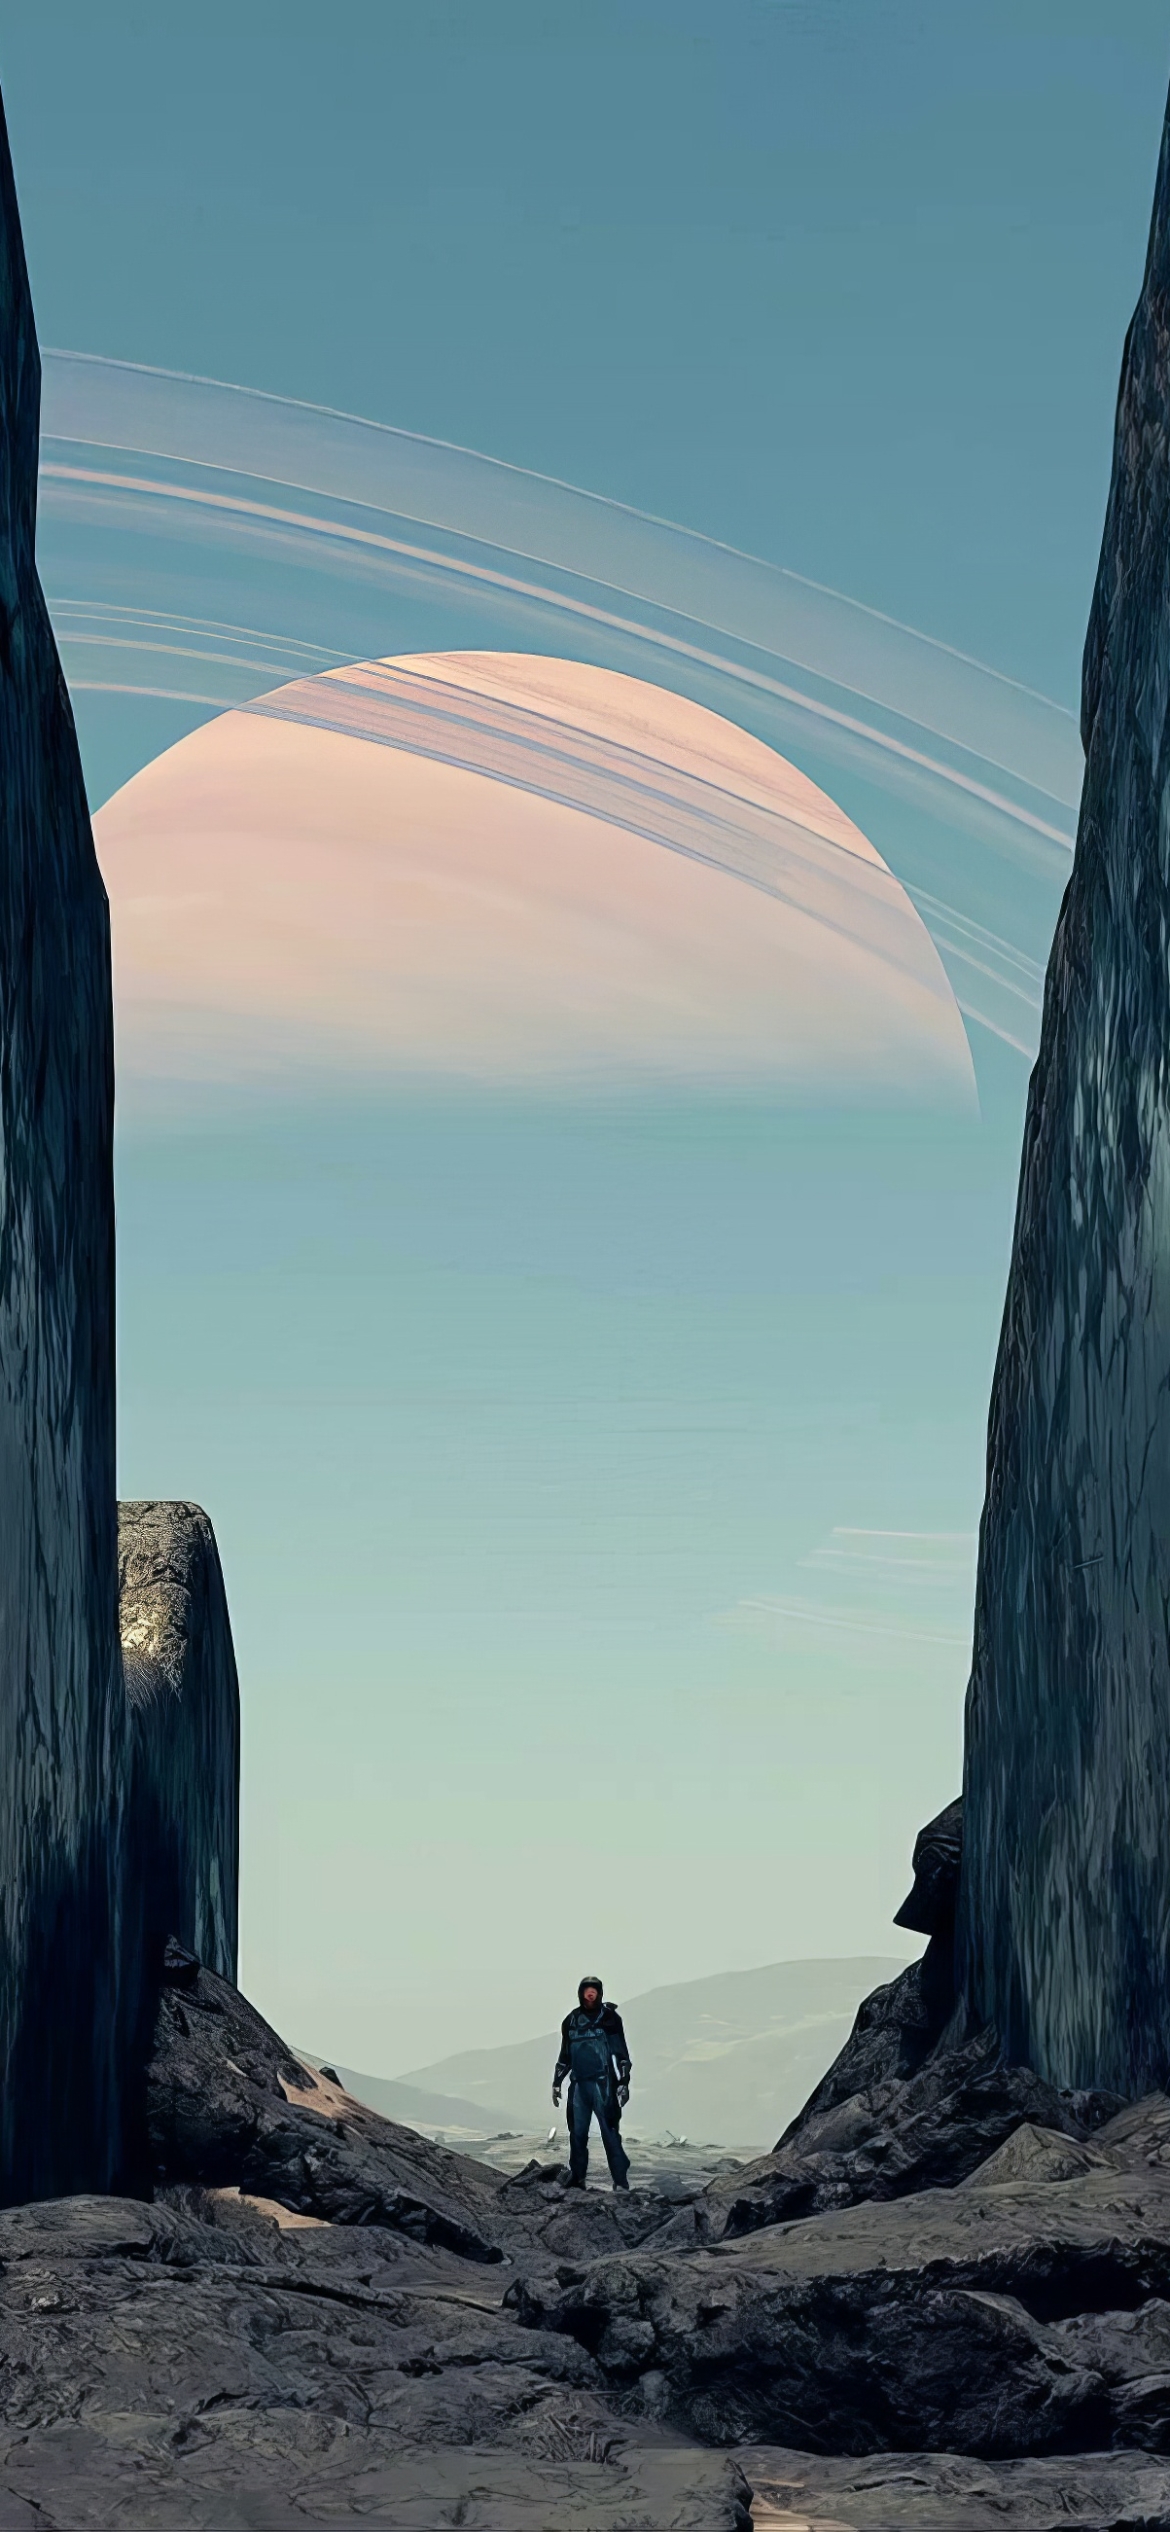 Futuristic space-themed phone wallpaper featuring a lone figure standing in a rocky terrain with a giant planet looming in the star-filled sky above.